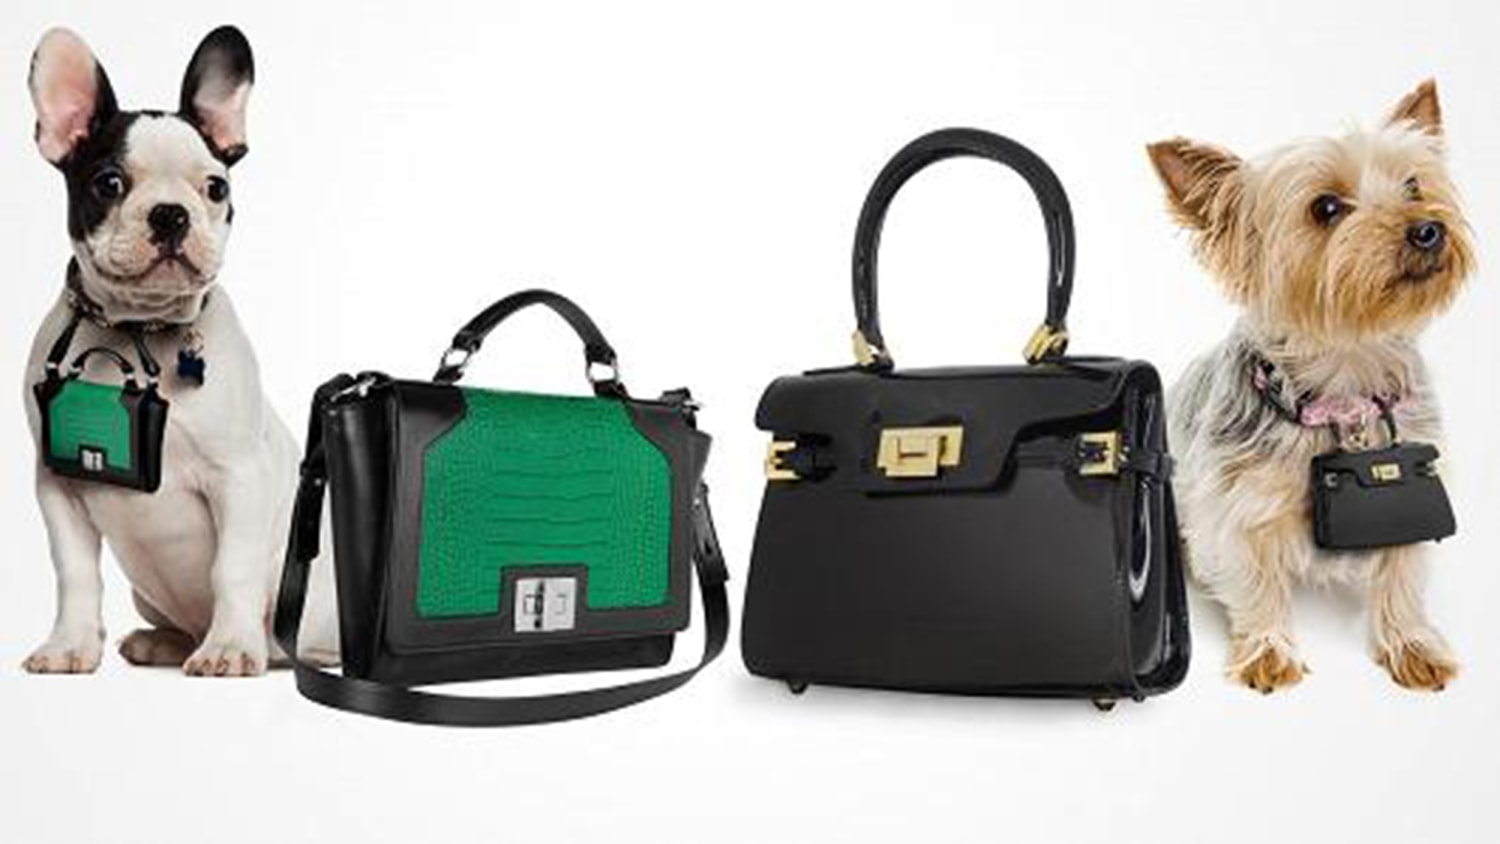 Designer Bags from Independent Luxury Brands | Sale on DOORS.NYC